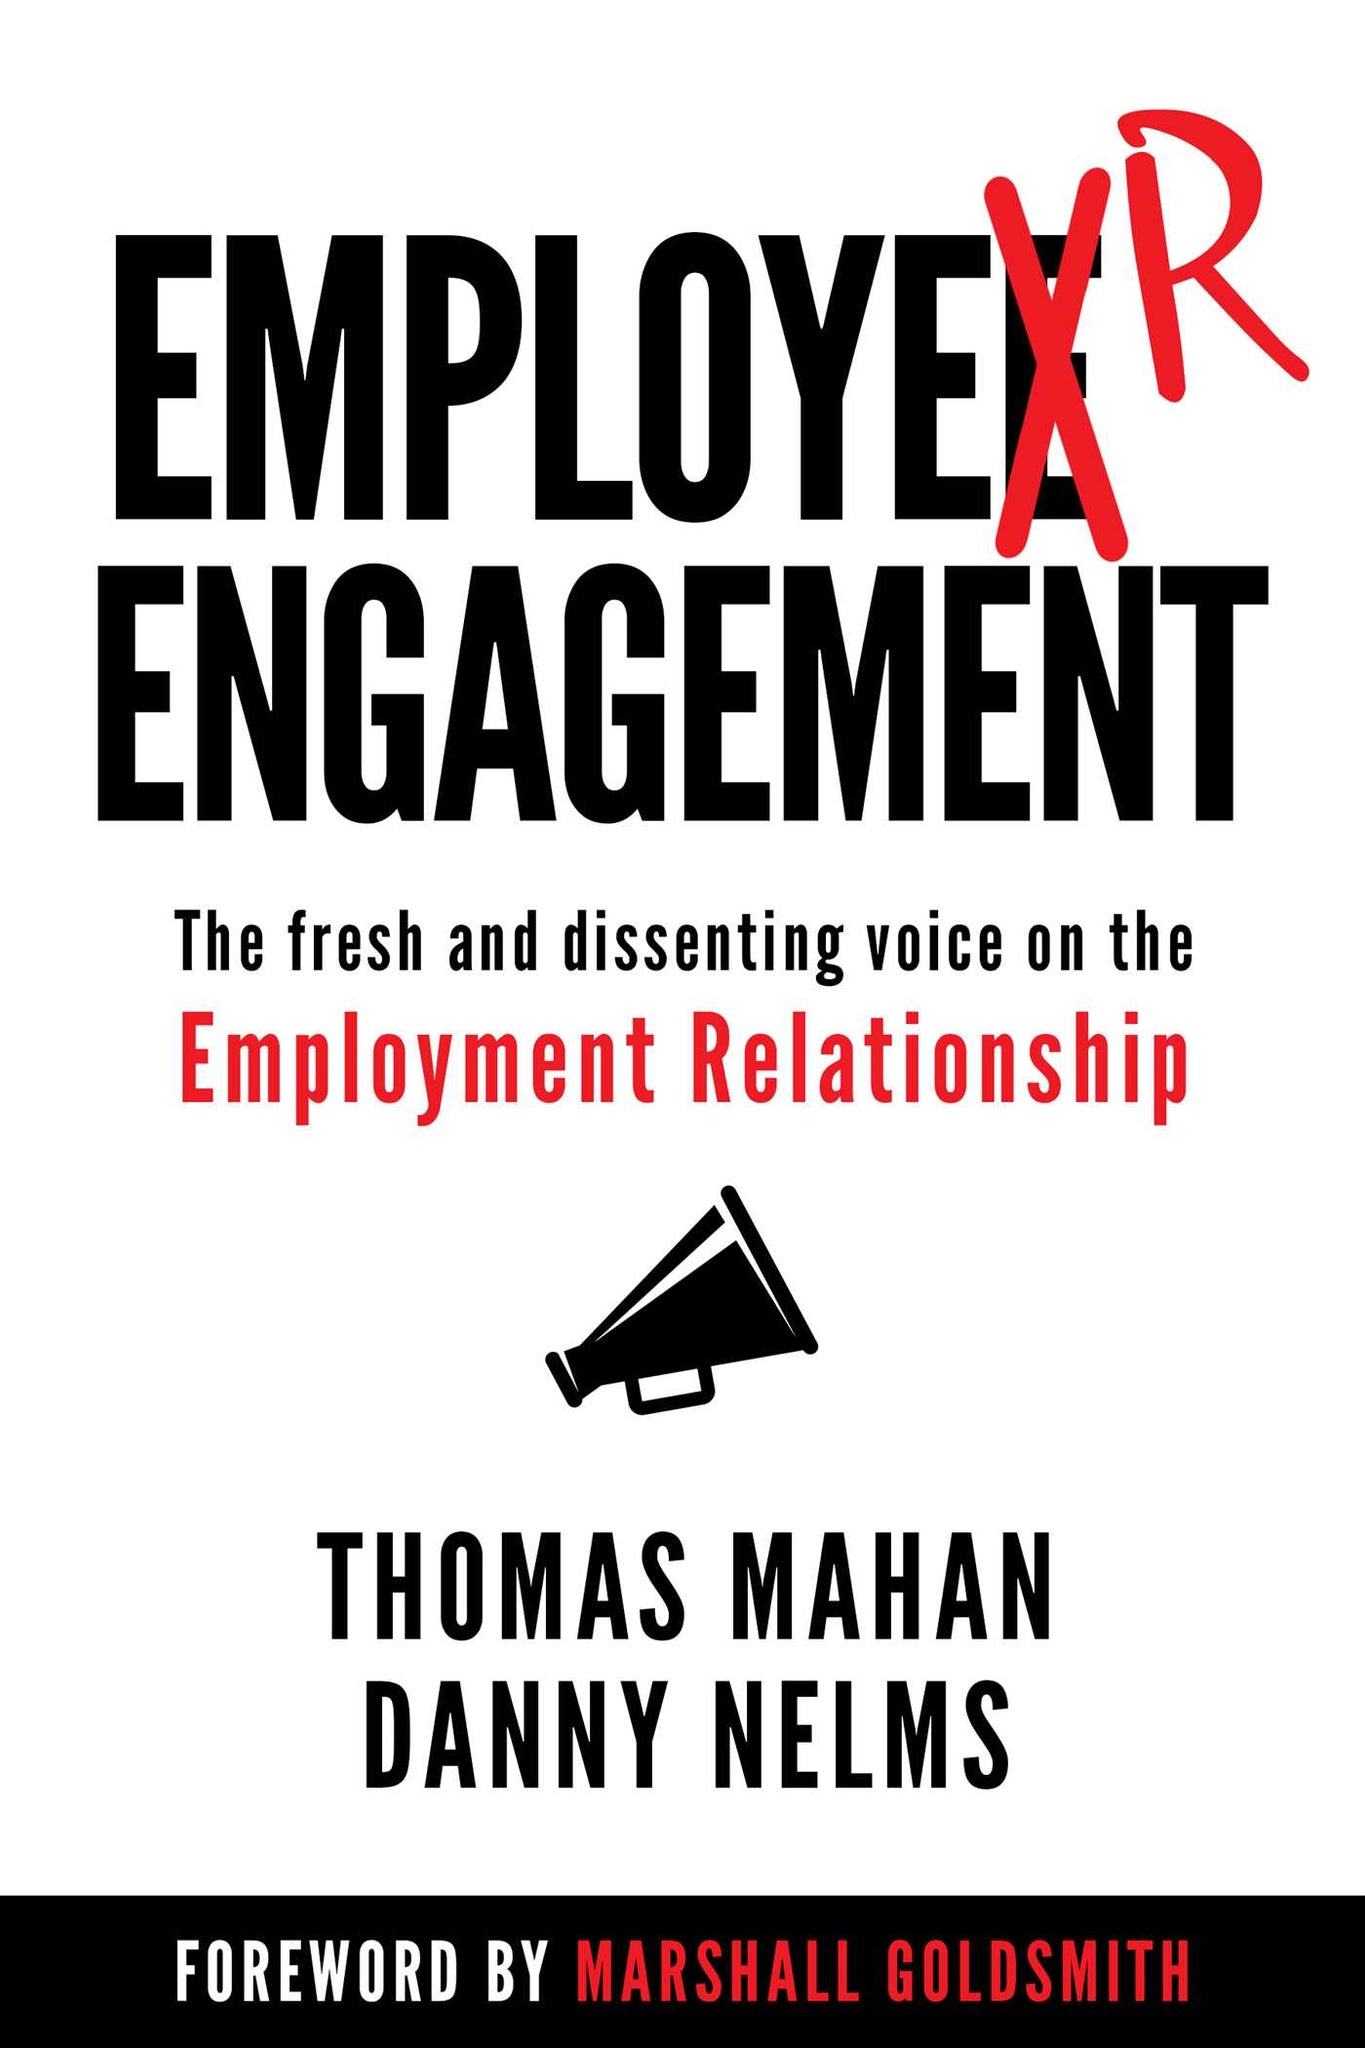 EmployER Engagement : The Fresh and Dissenting Voice on the Employment Relationship